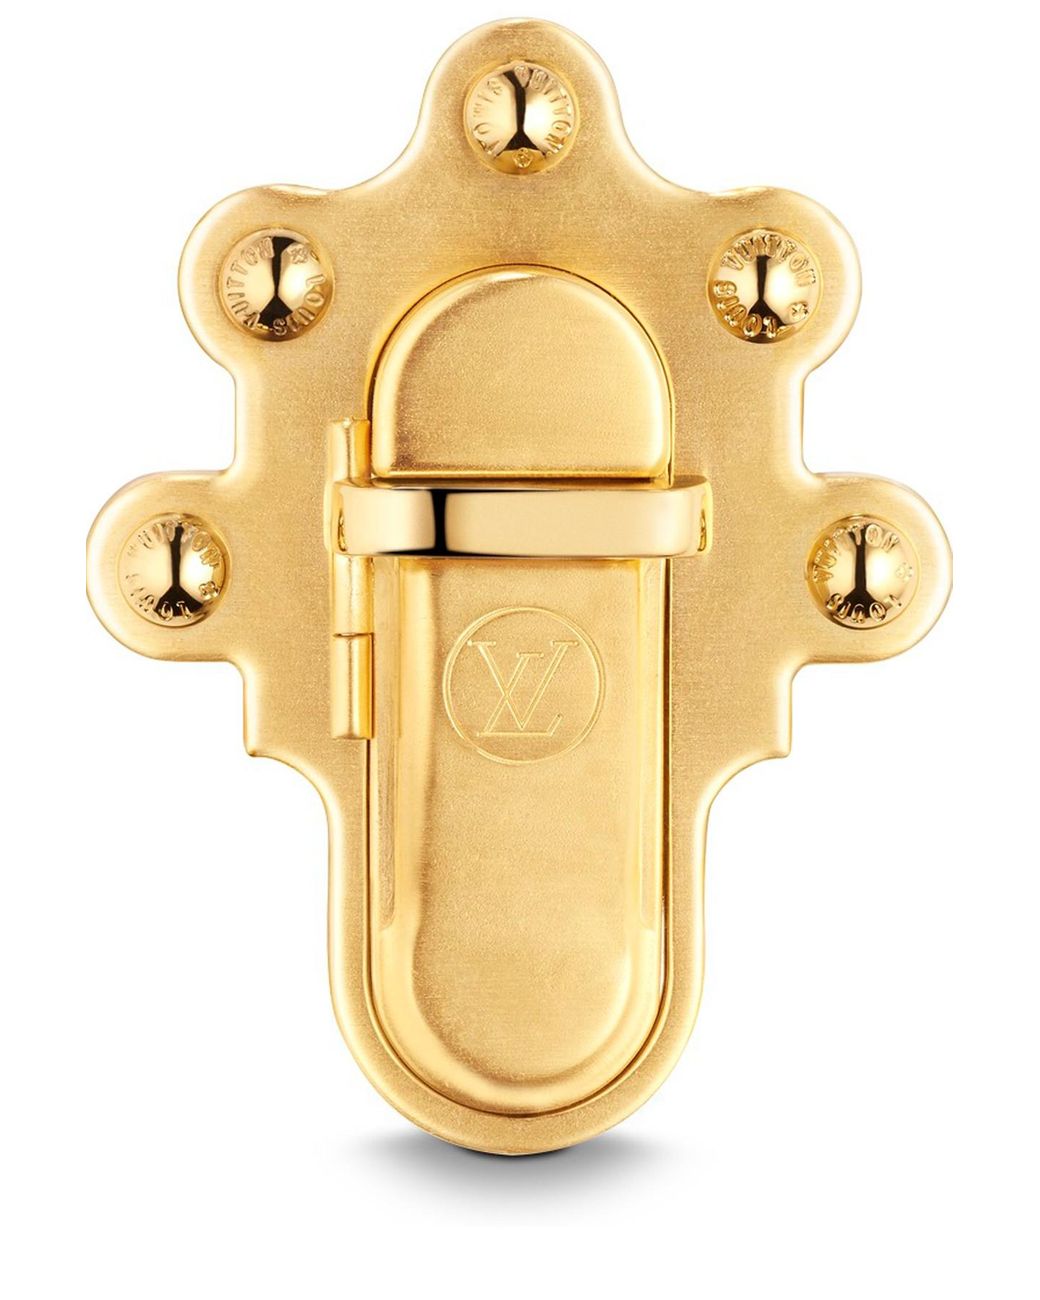 Louis Vuitton Trunk Lock Pendant Necklace And Brooch in Metallic